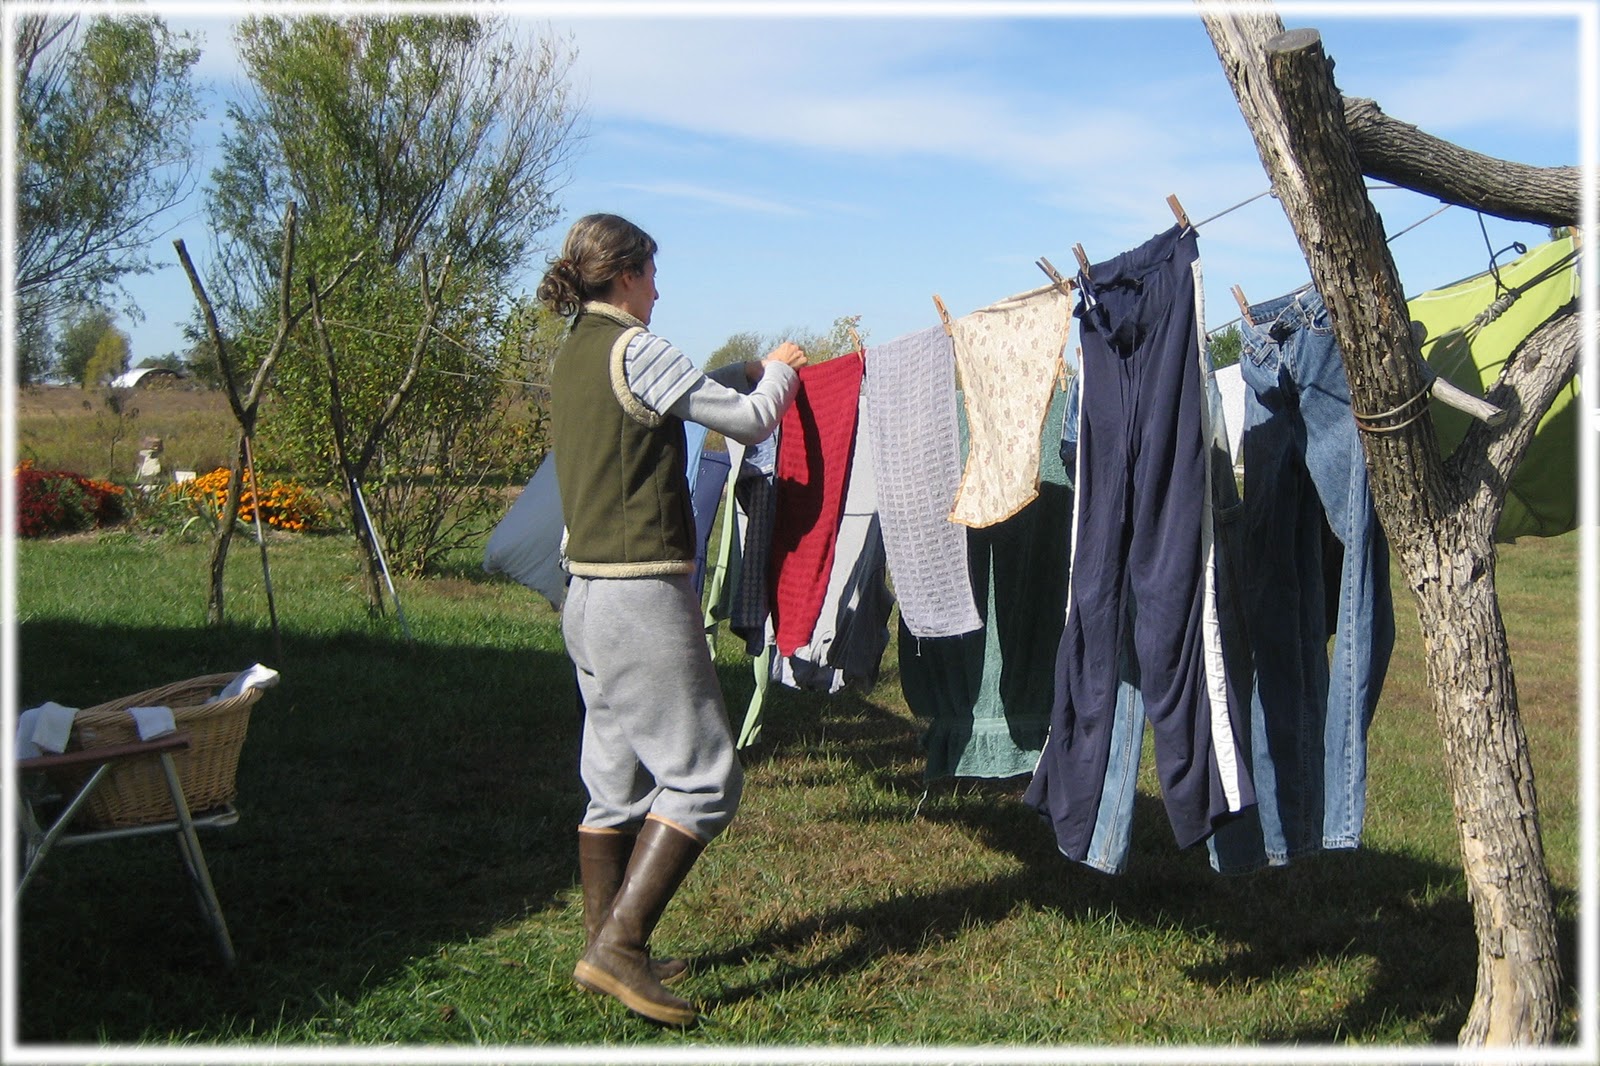 How to dry your clothes when camping